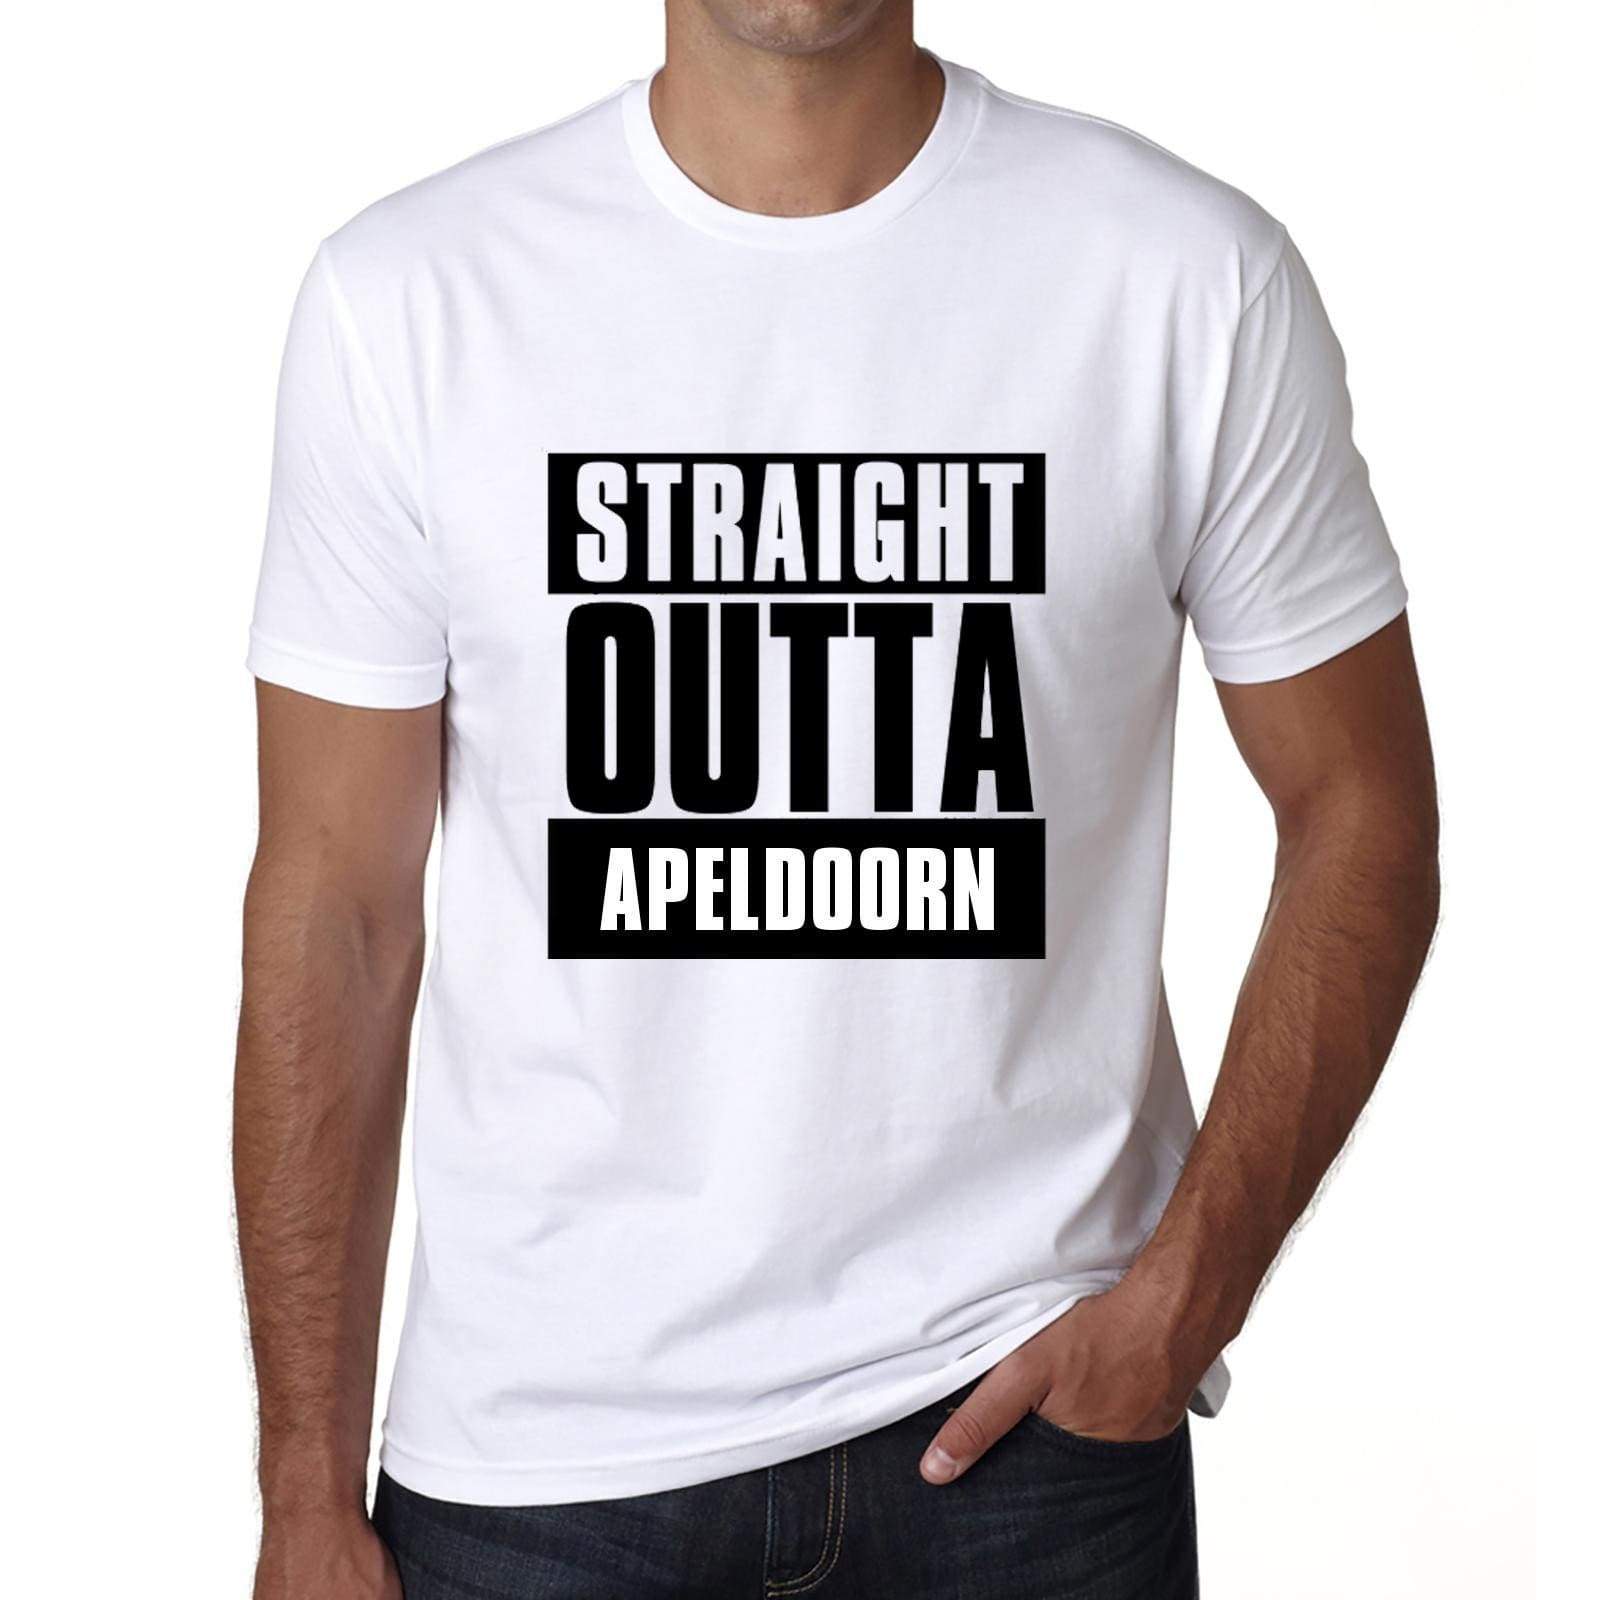 Straight Outta Apeldoorn Mens Short Sleeve Round Neck T-Shirt 00027 - White / S - Casual